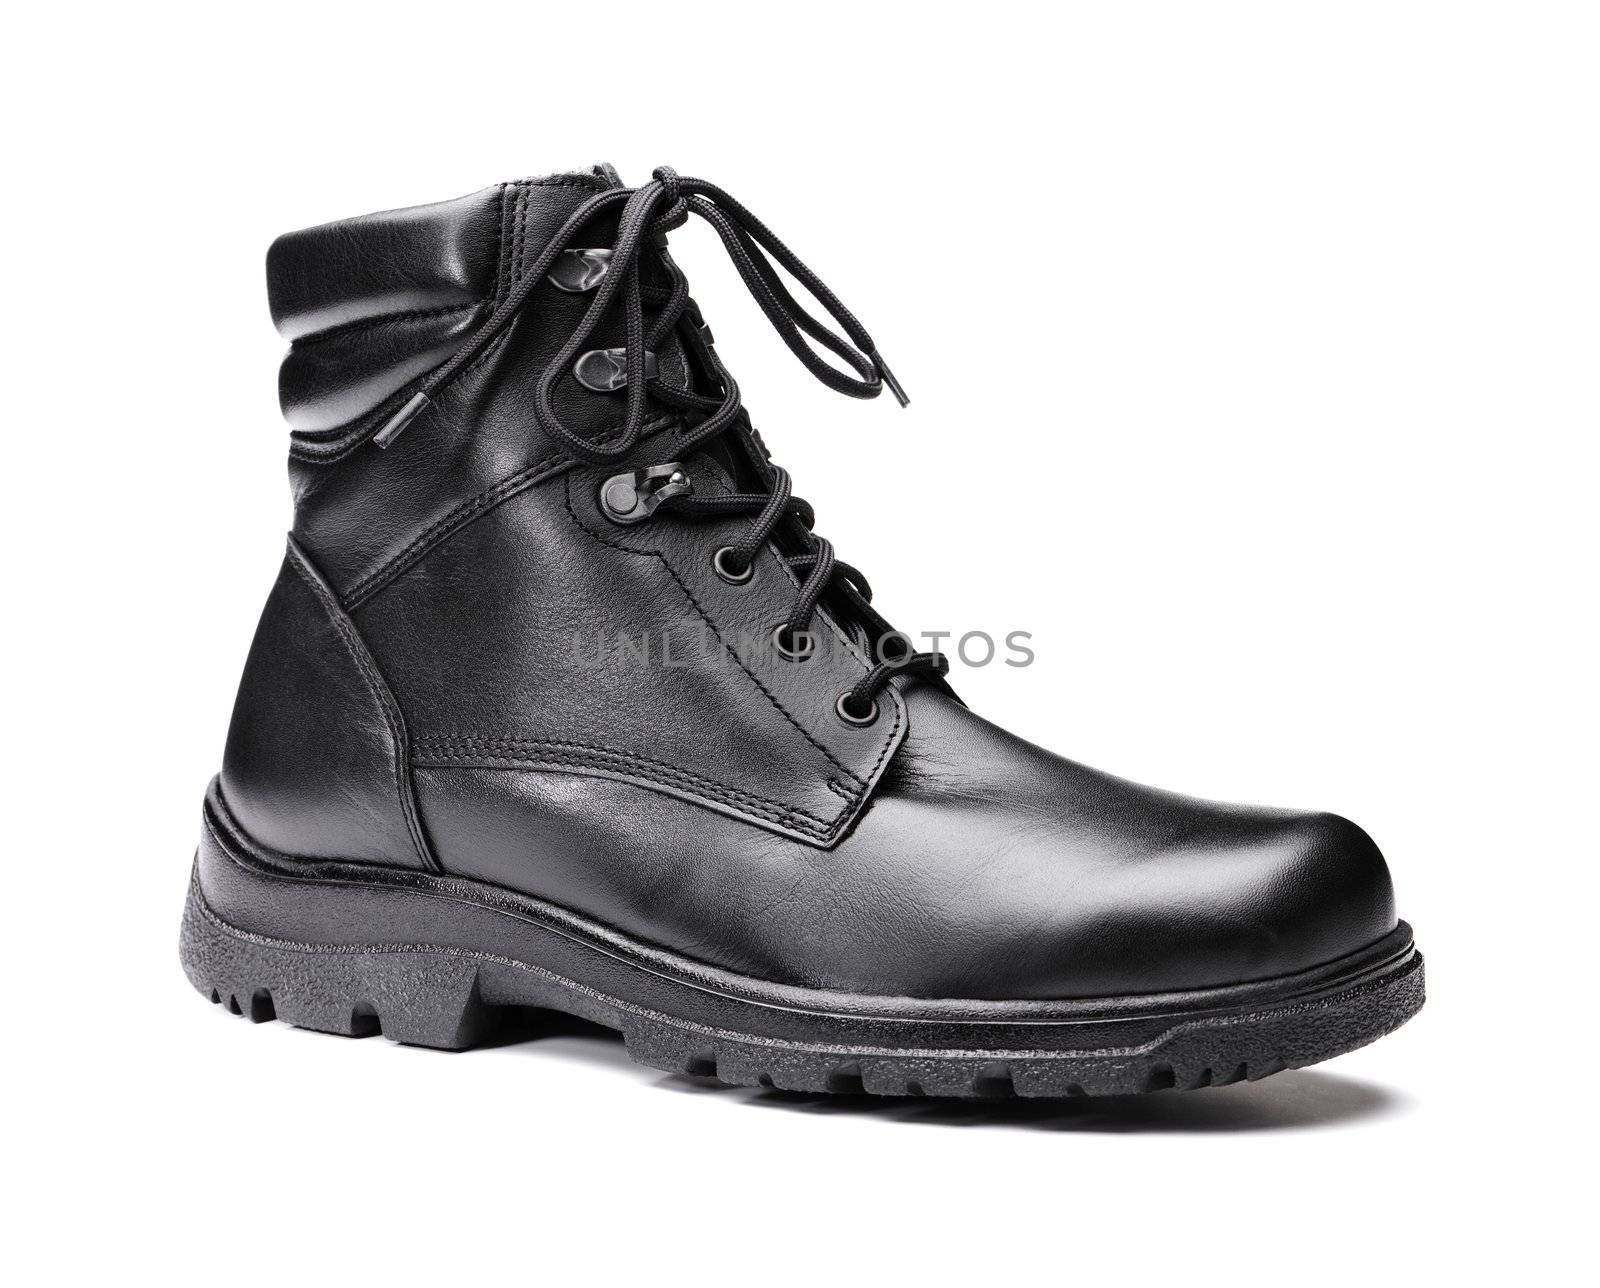 A New men's insulated black leather winter boot isolated on white.